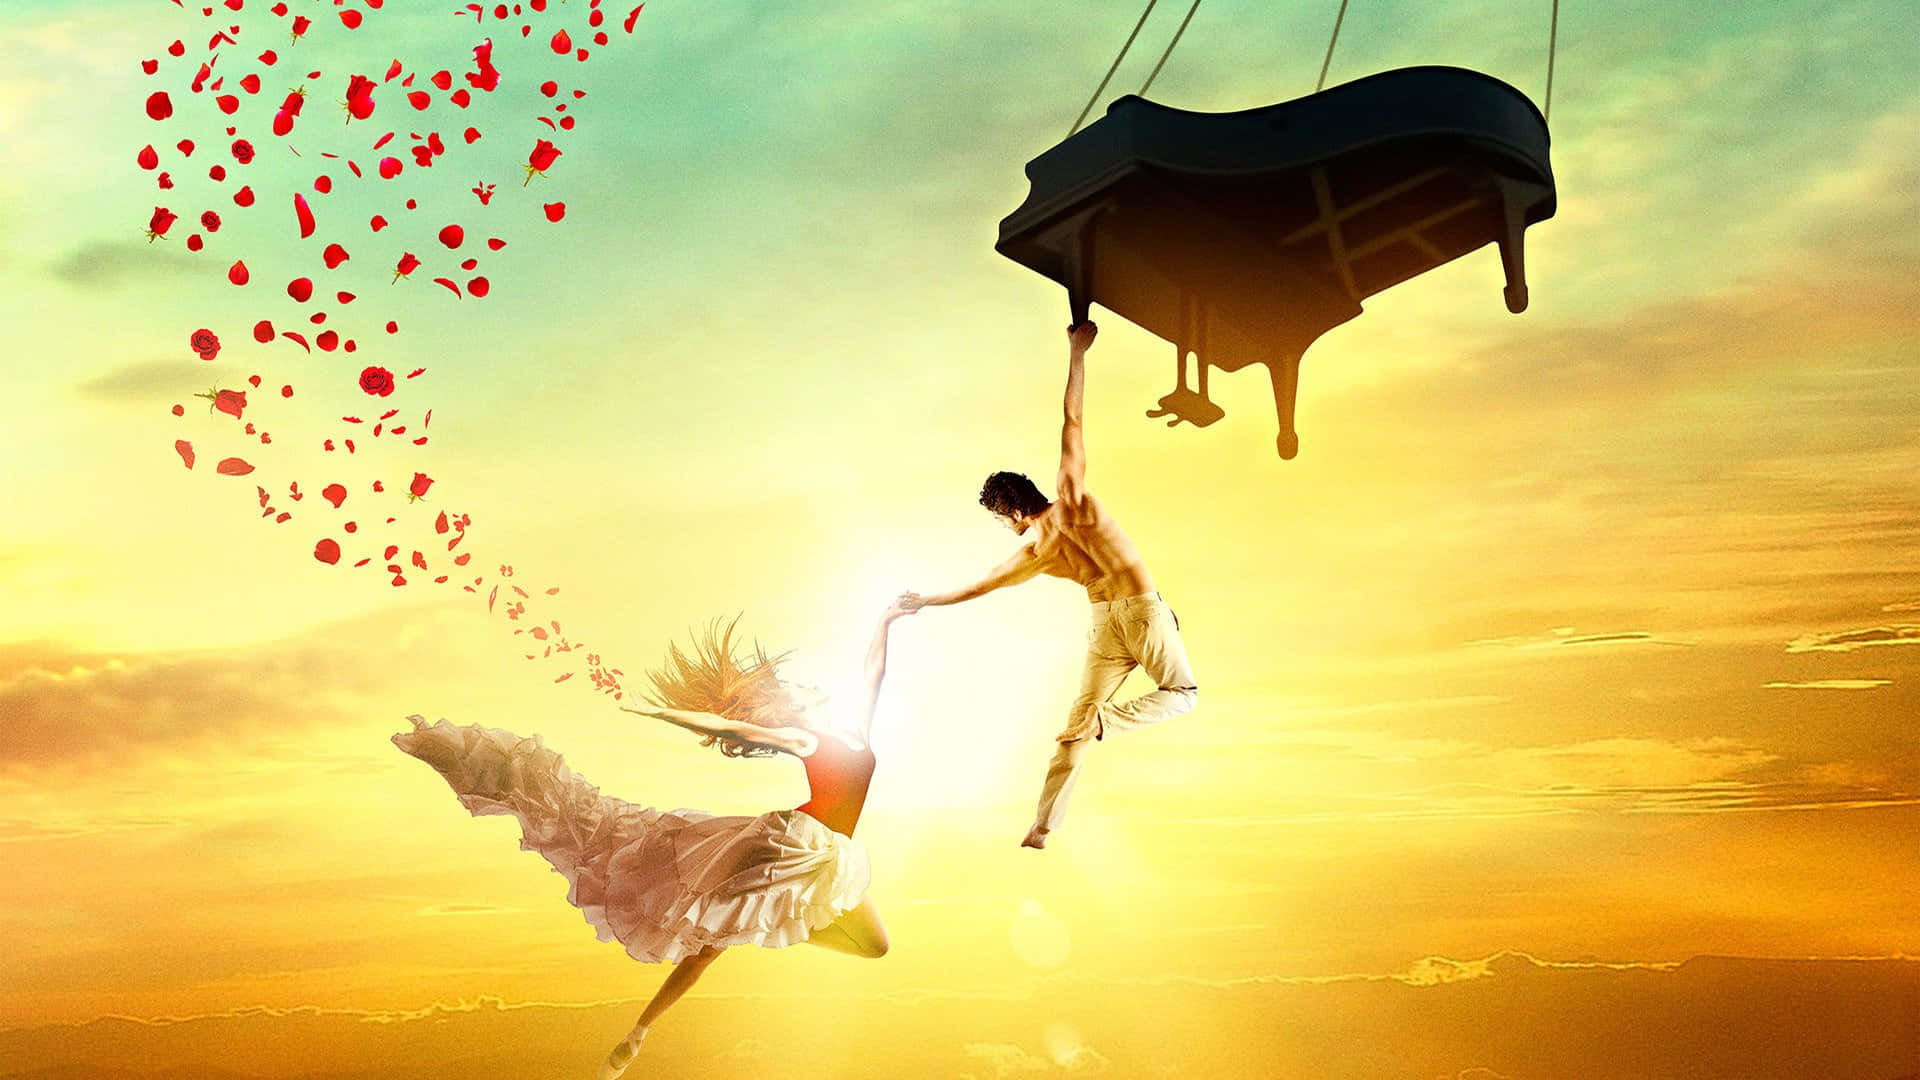 A Poster For A Ballet With Two People Flying In The Air Wallpaper